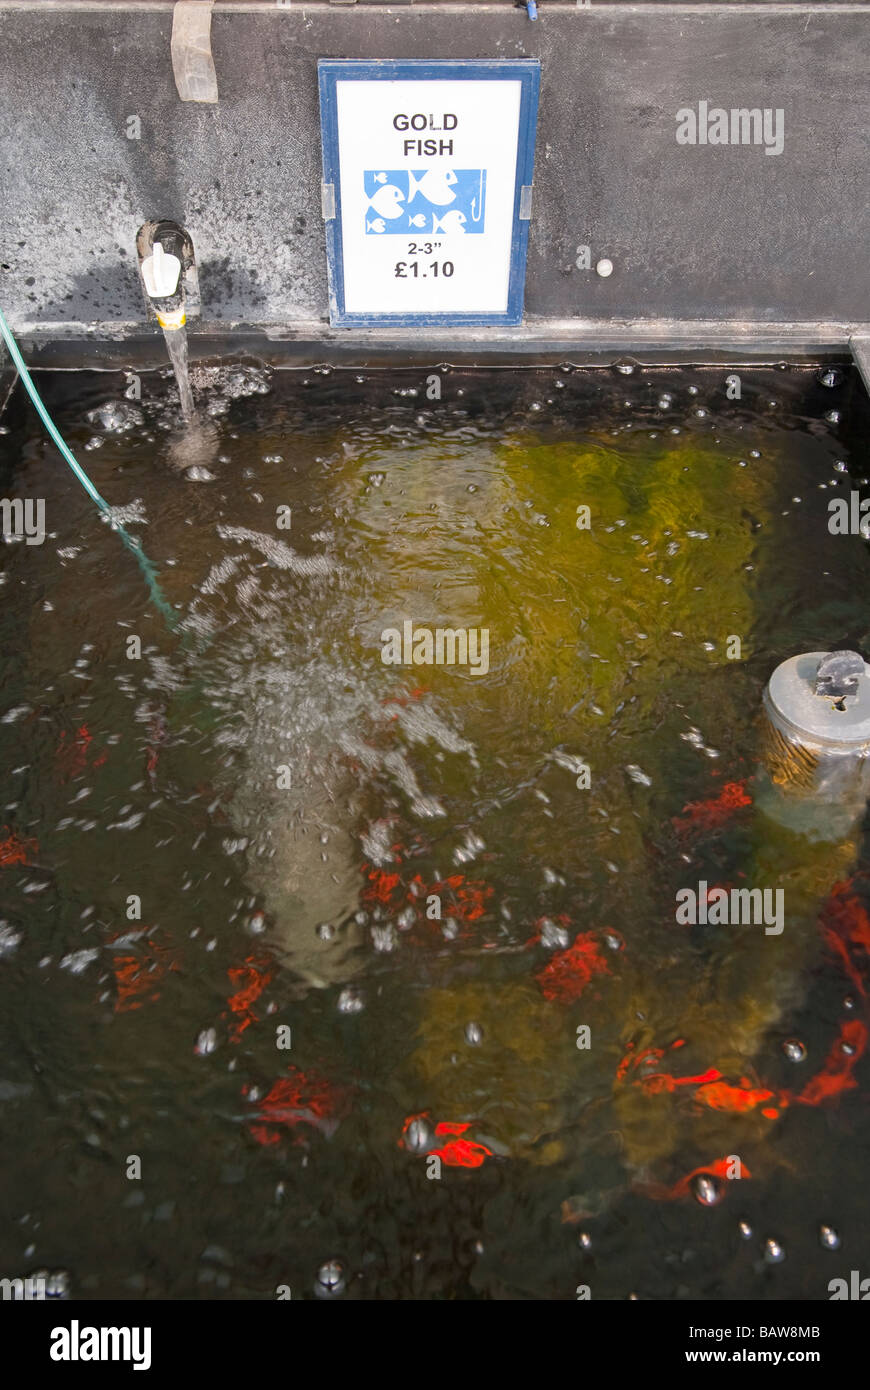 Goldfish for sale at a uk garden centre for your pond Stock Photo